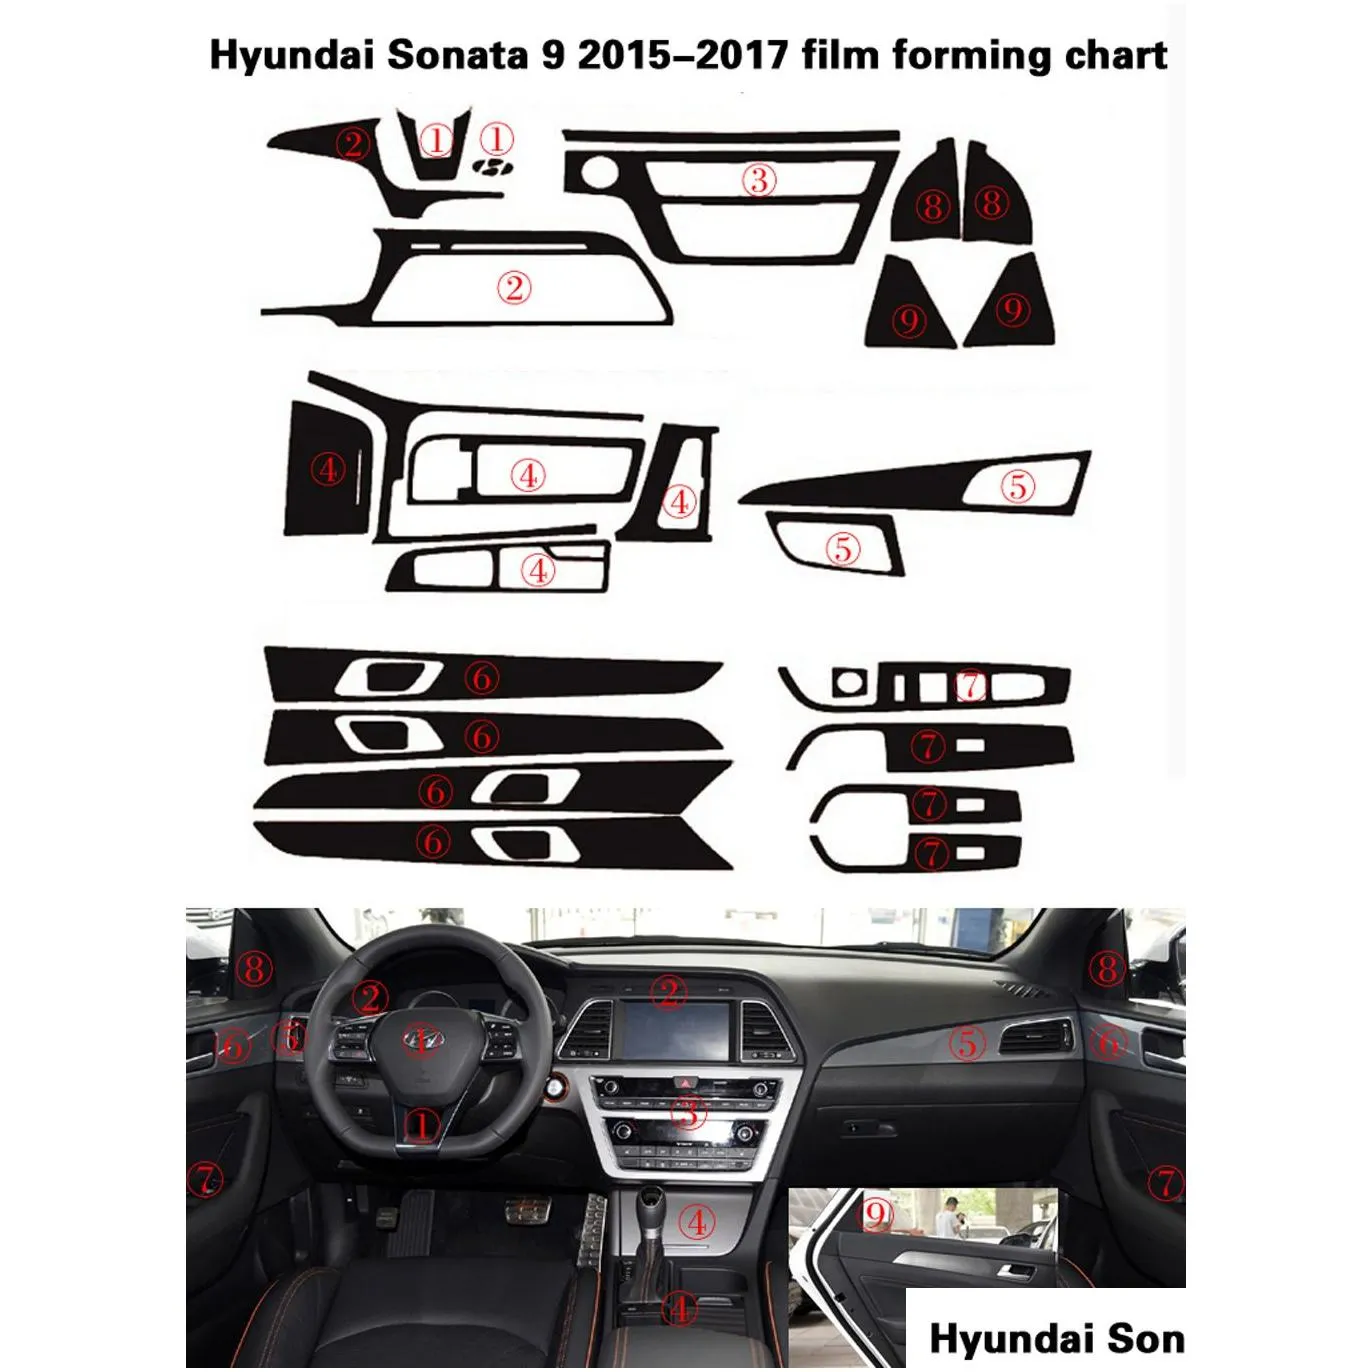 Stickers For Hyundai sonata 9 20152017 Interior Central Control Panel Door Handle 3 Carbon Fiber Stickers Decals Car styling